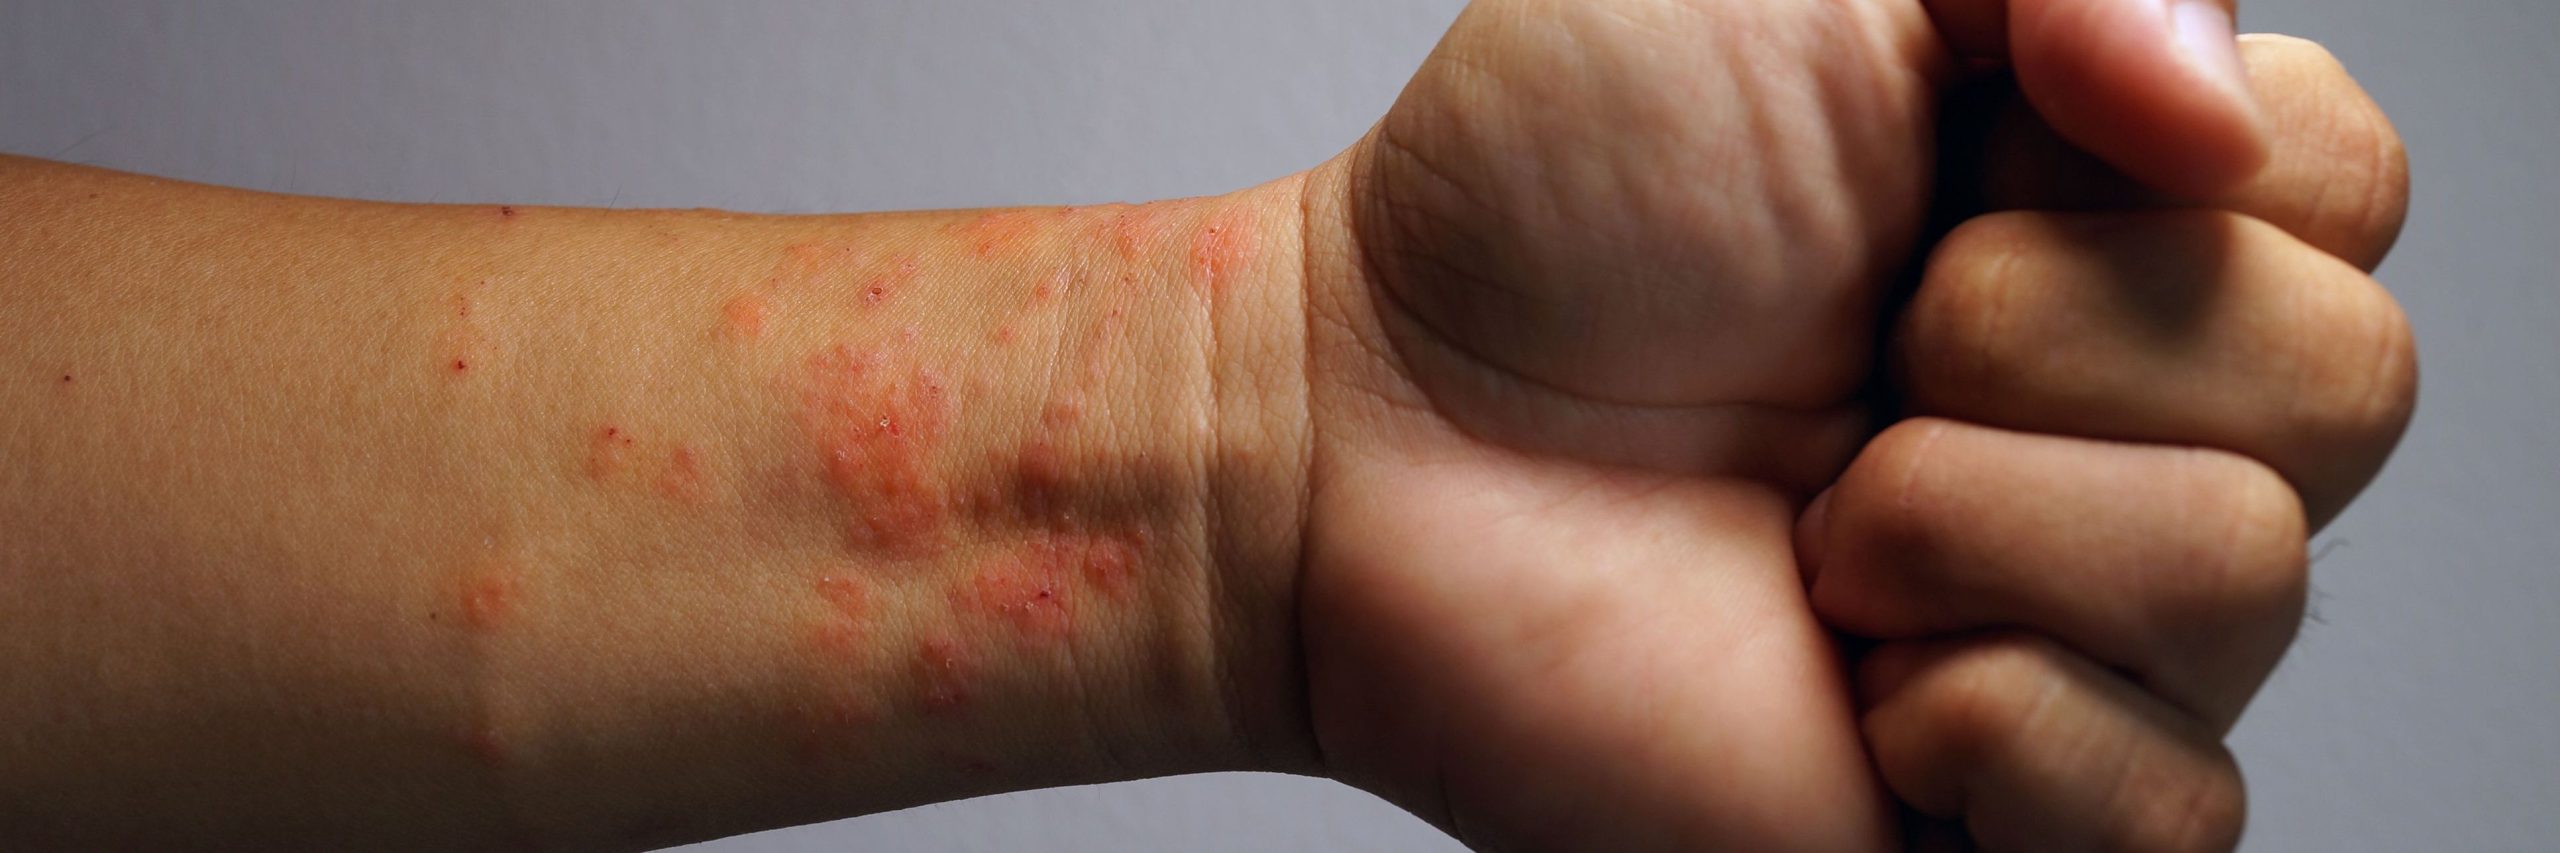 Systemic Antibiotics in First Year of Life Tied to Higher Atopic Dermatitis Risk